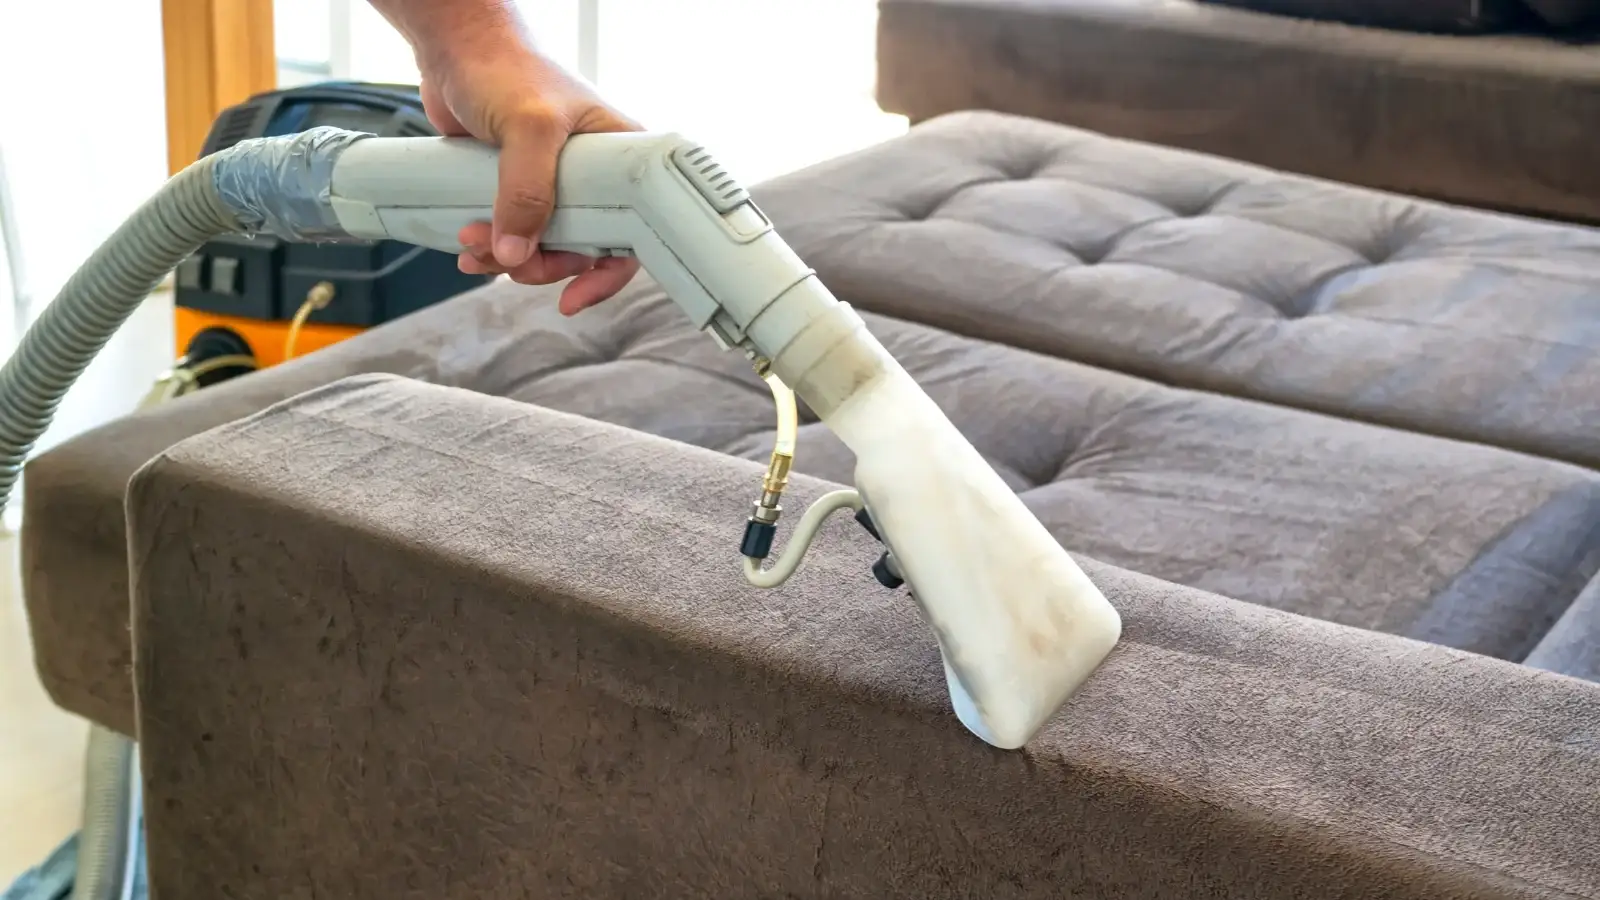 A person cleaning a couch with a vacuum cleaner.